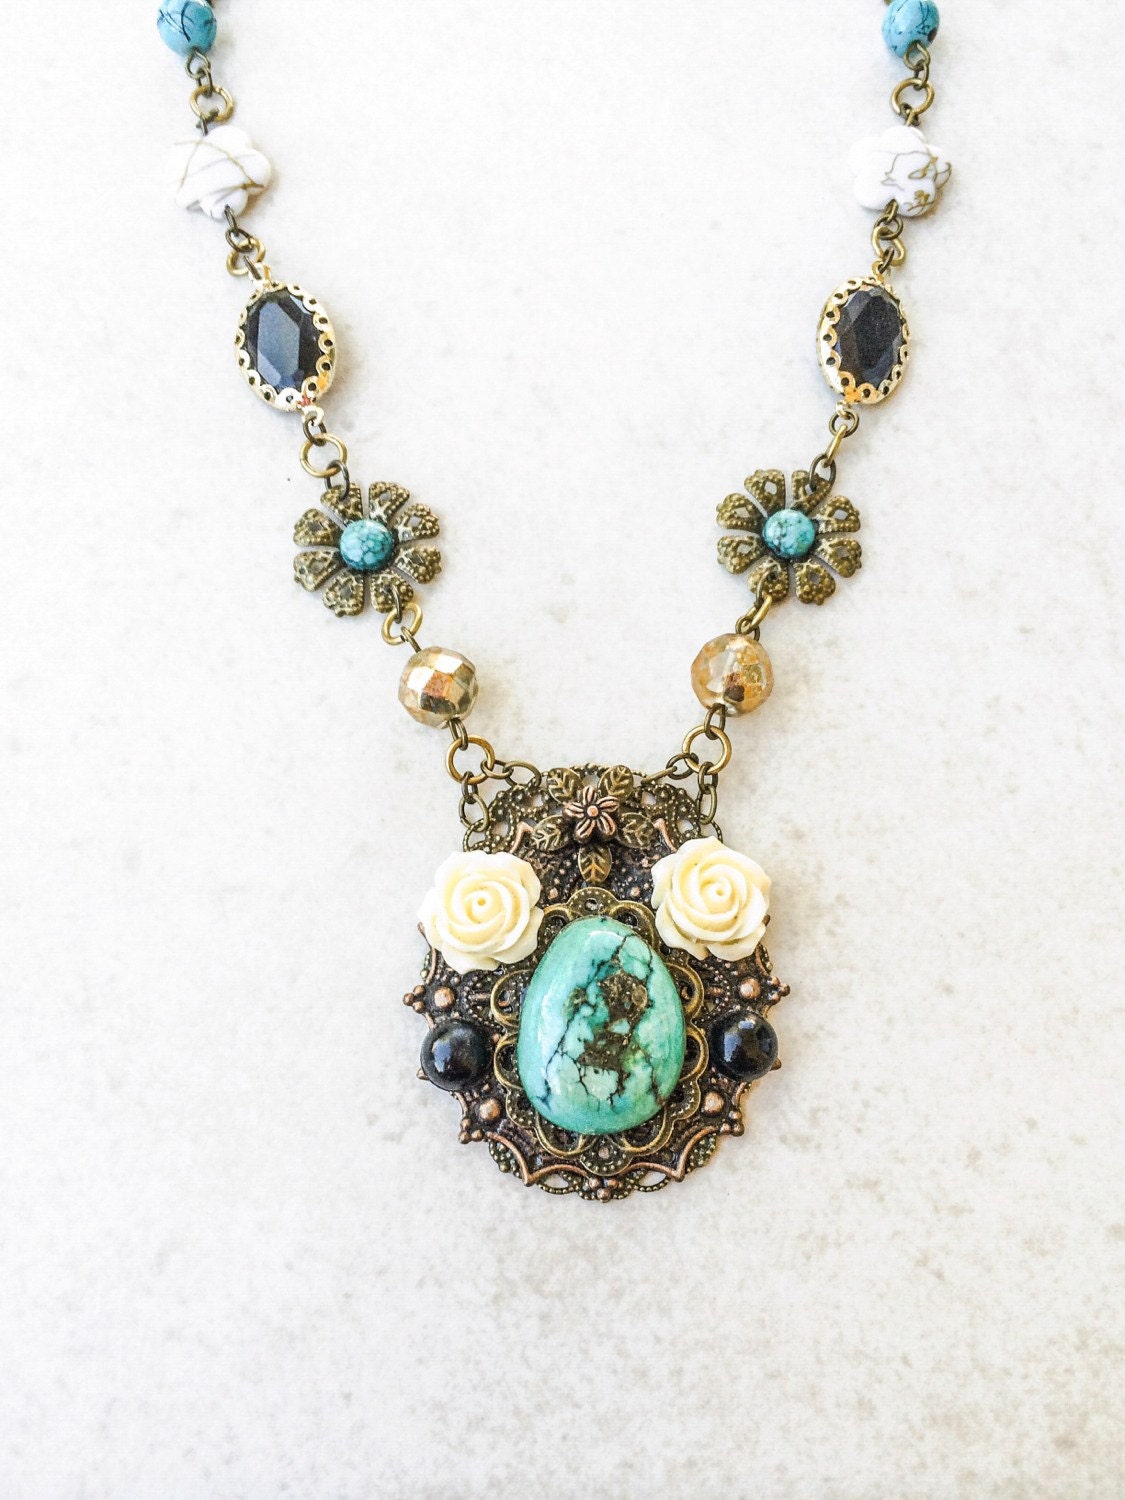 Turquoise Assemblage Flower Necklace Stone Pendant Collage